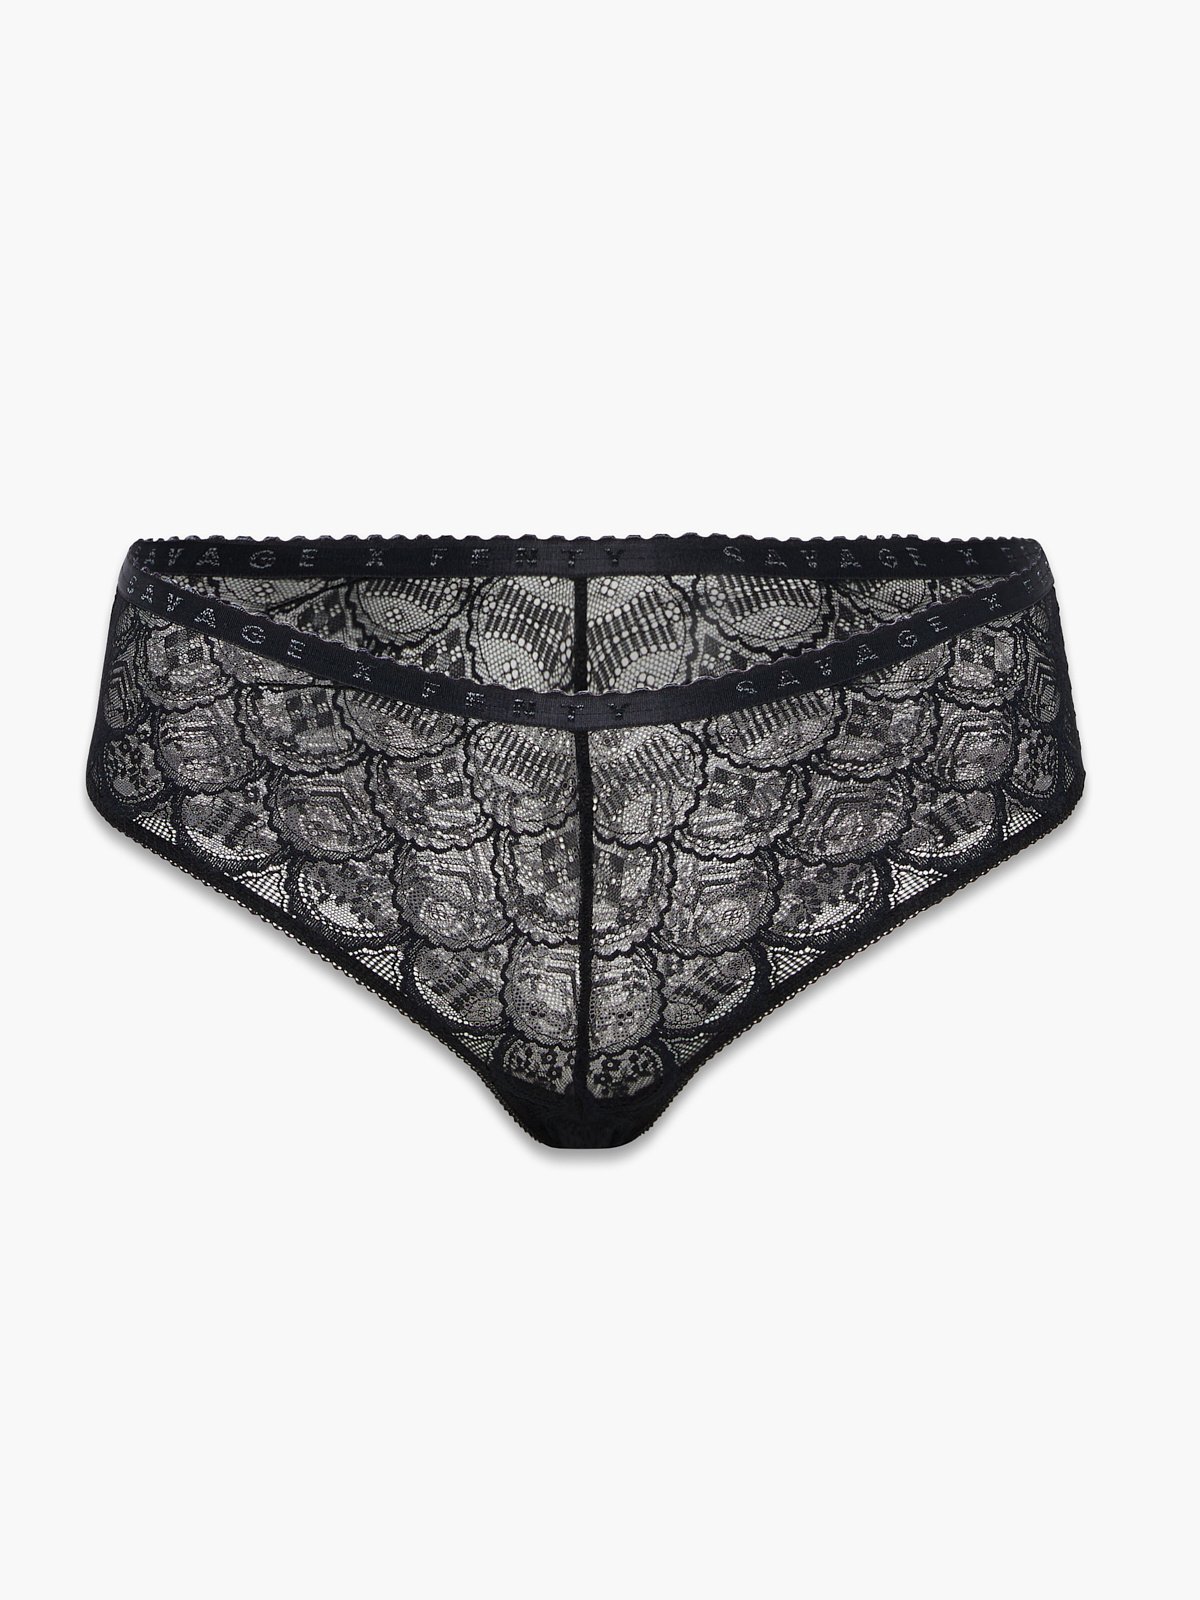 X-Rated Lace Hipster Panty in Black | SAVAGE X FENTY